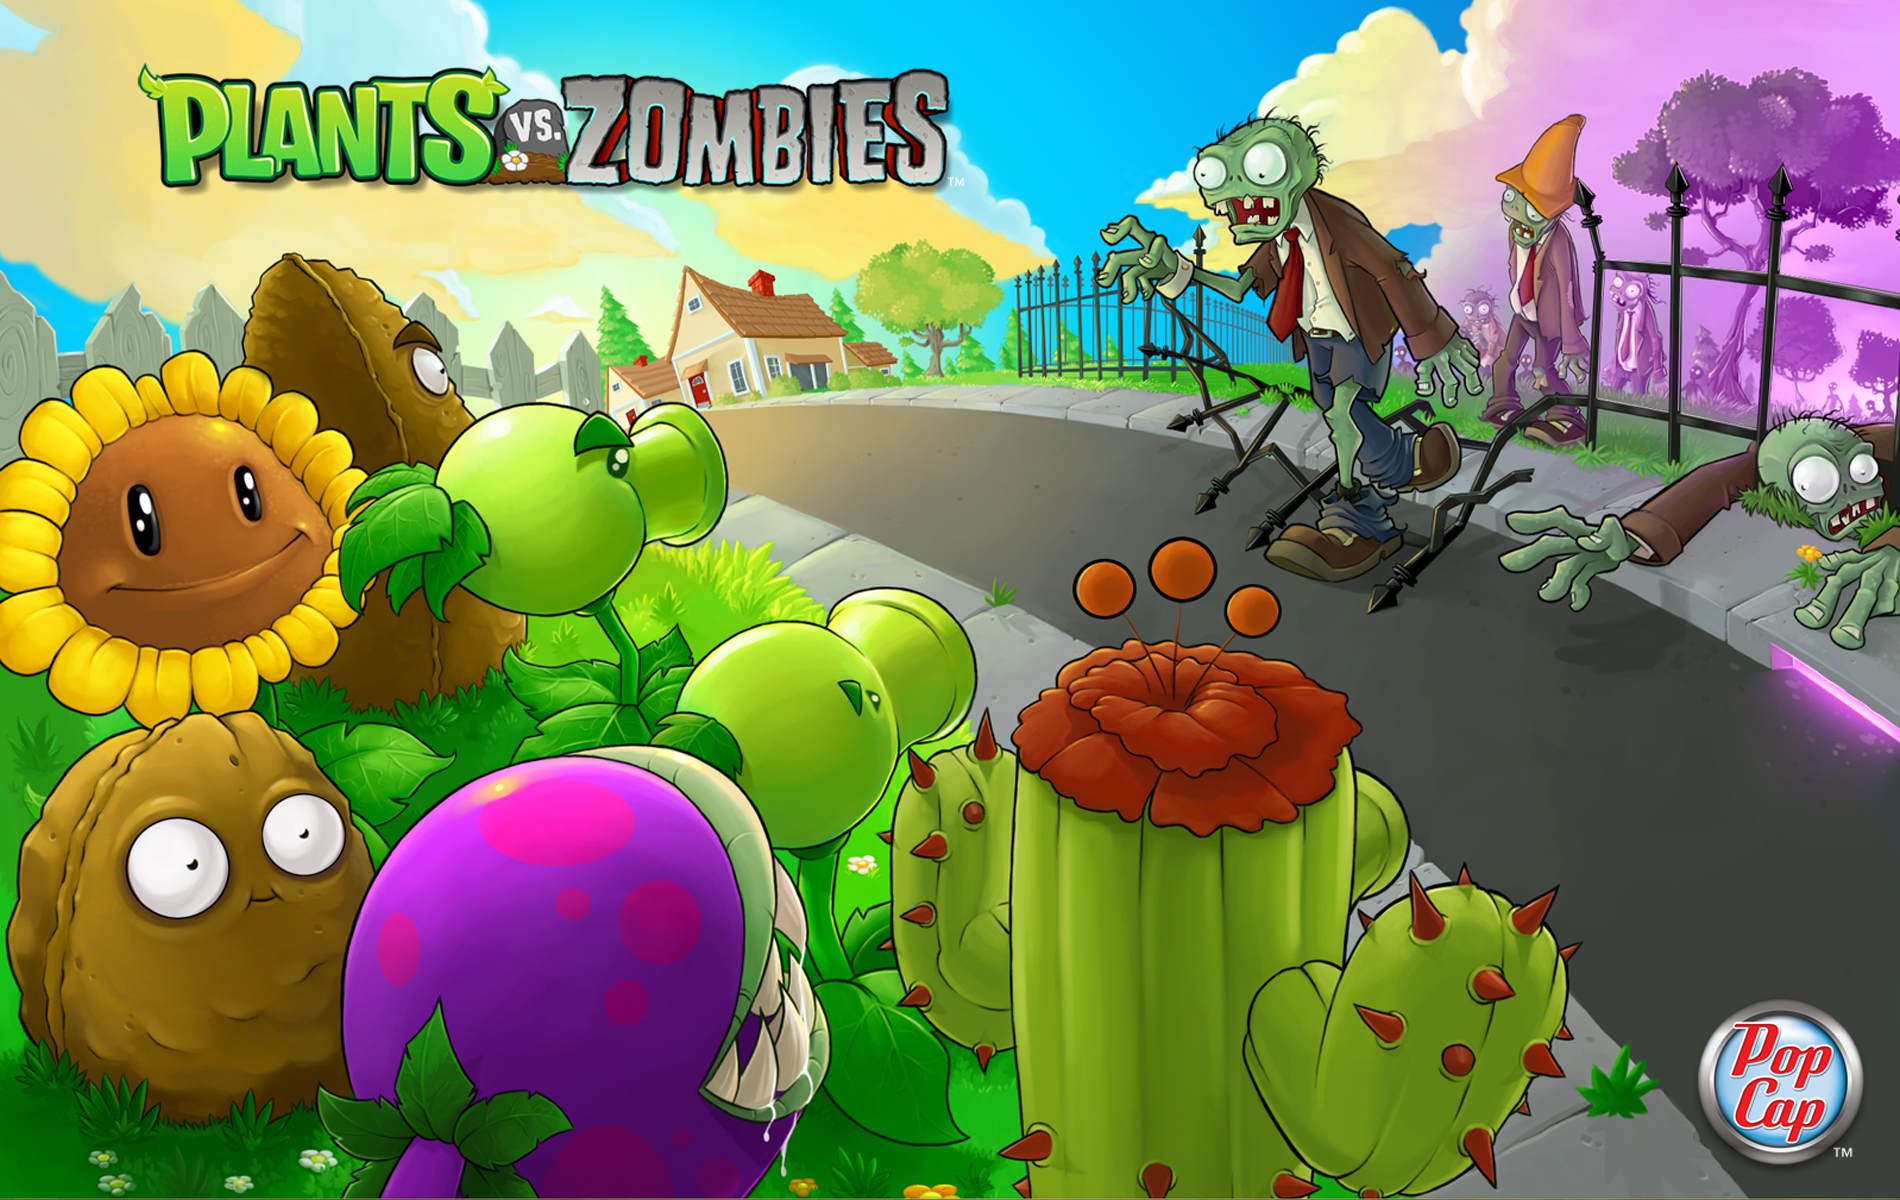 PopCap Games | Plants vs. Zombies - Wallpapers, Music and More